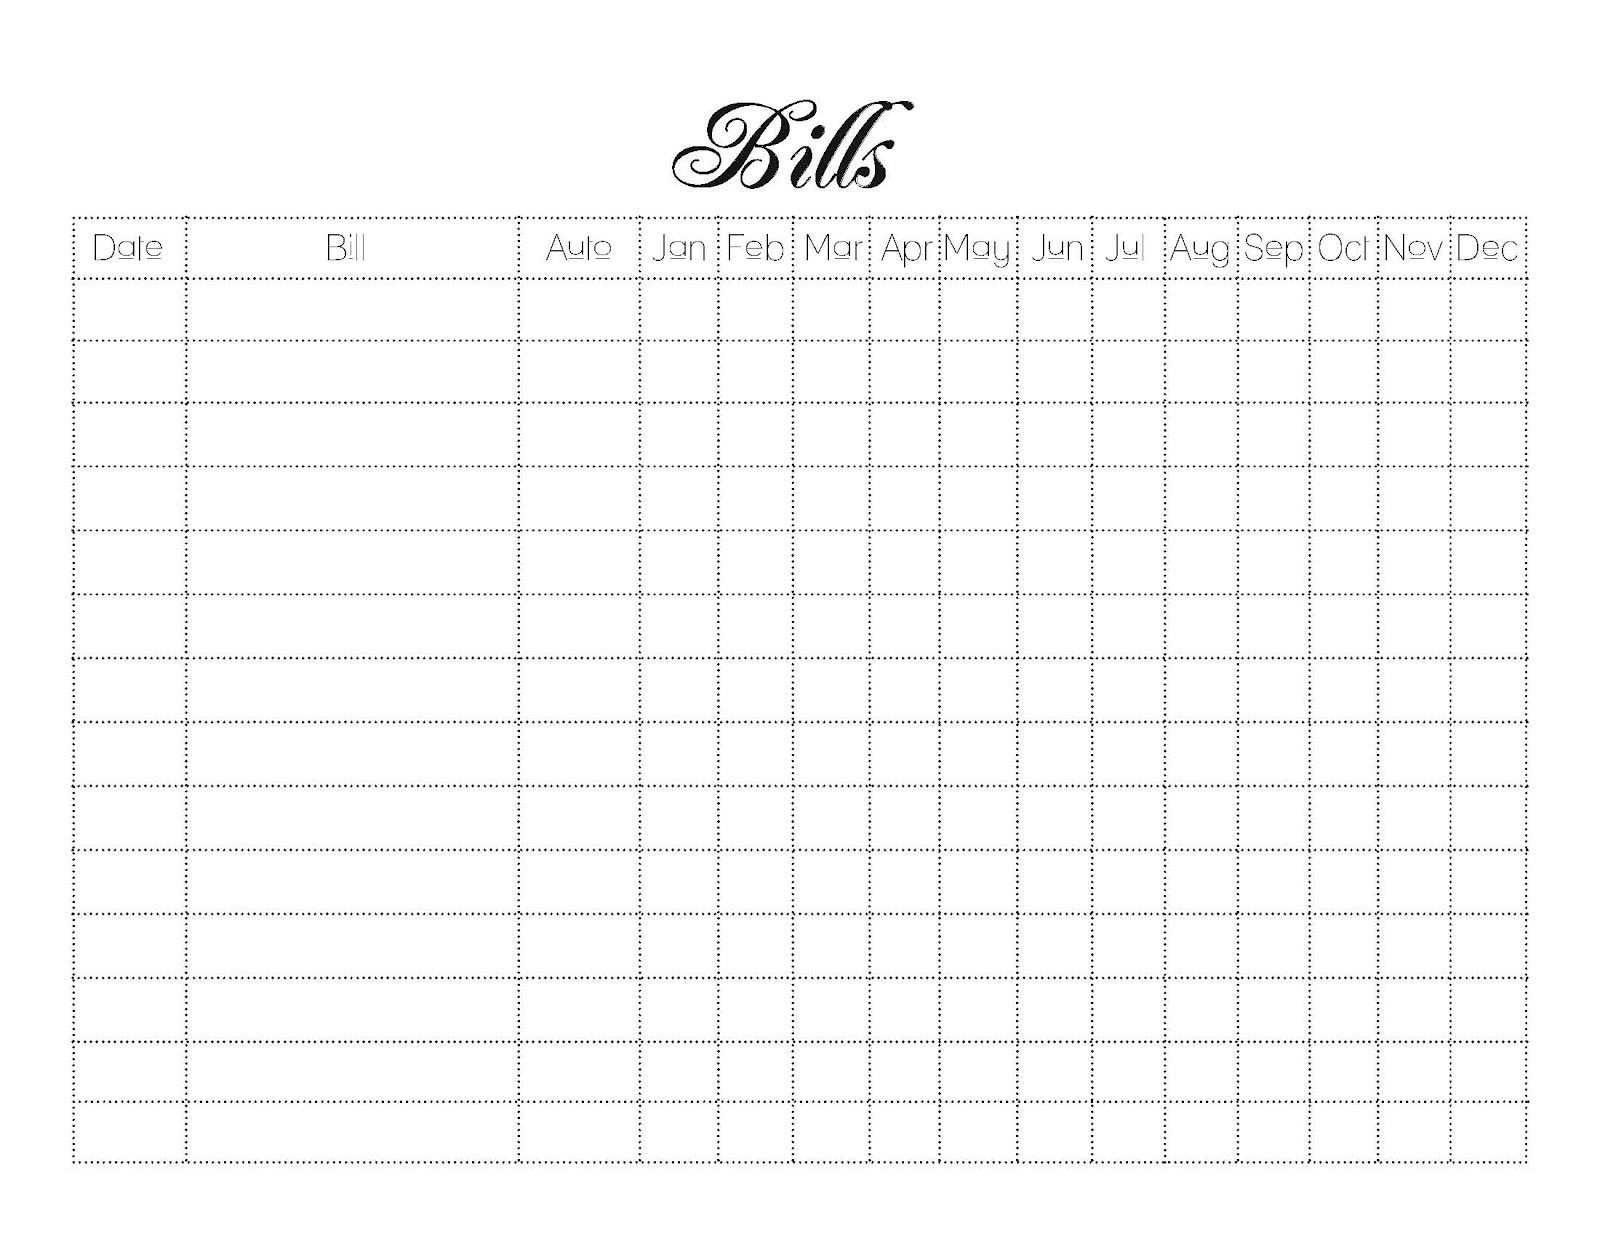 Free Printable Monthly Bill Templates | Bill Template, Bills  Free Blank Printable Monthly Bill Template